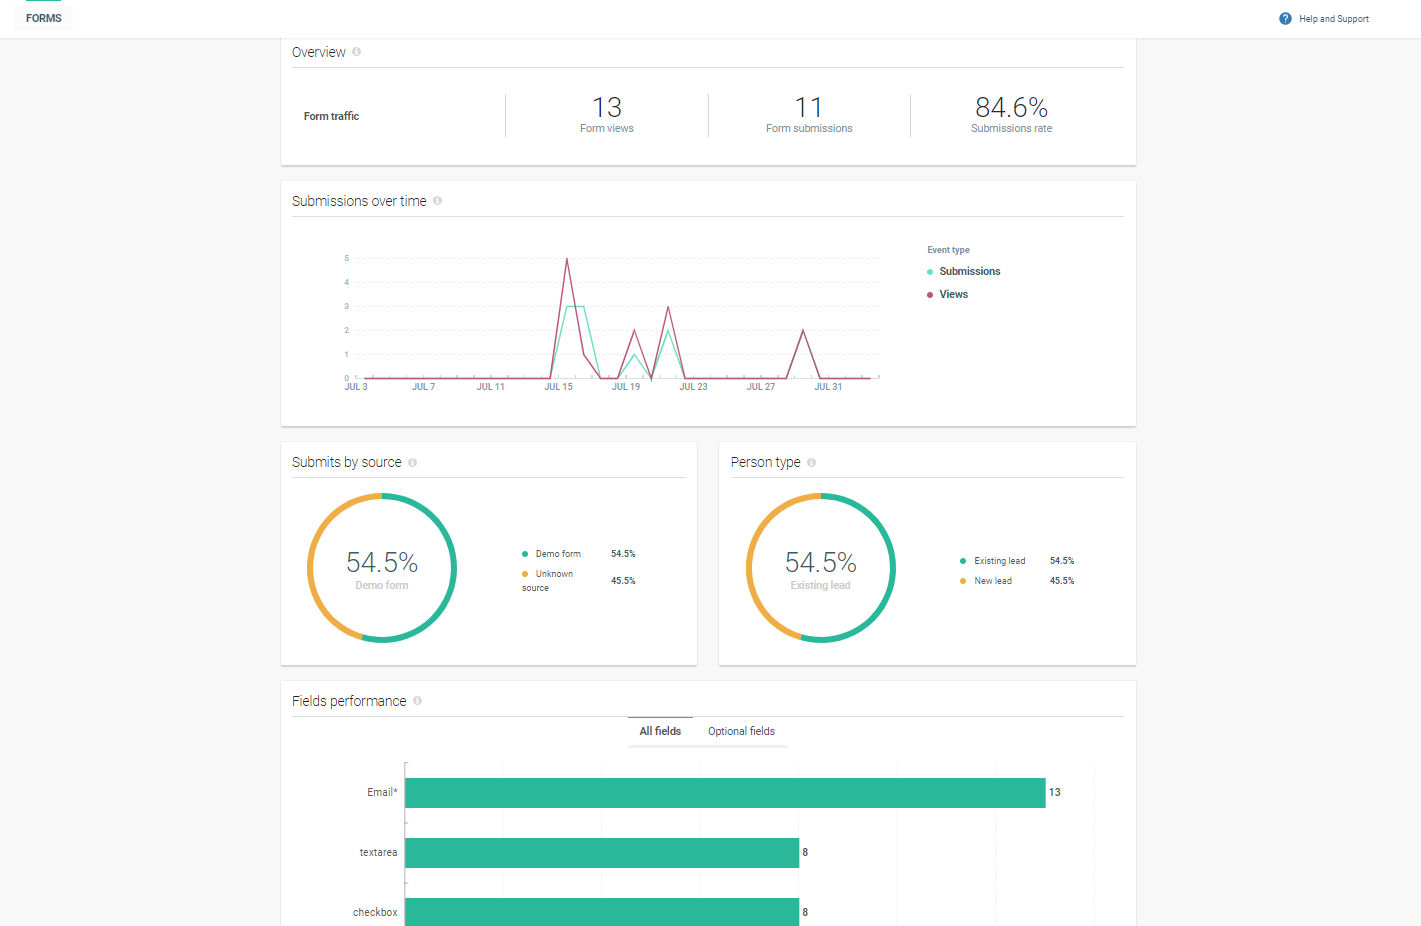 The Overview dashboard